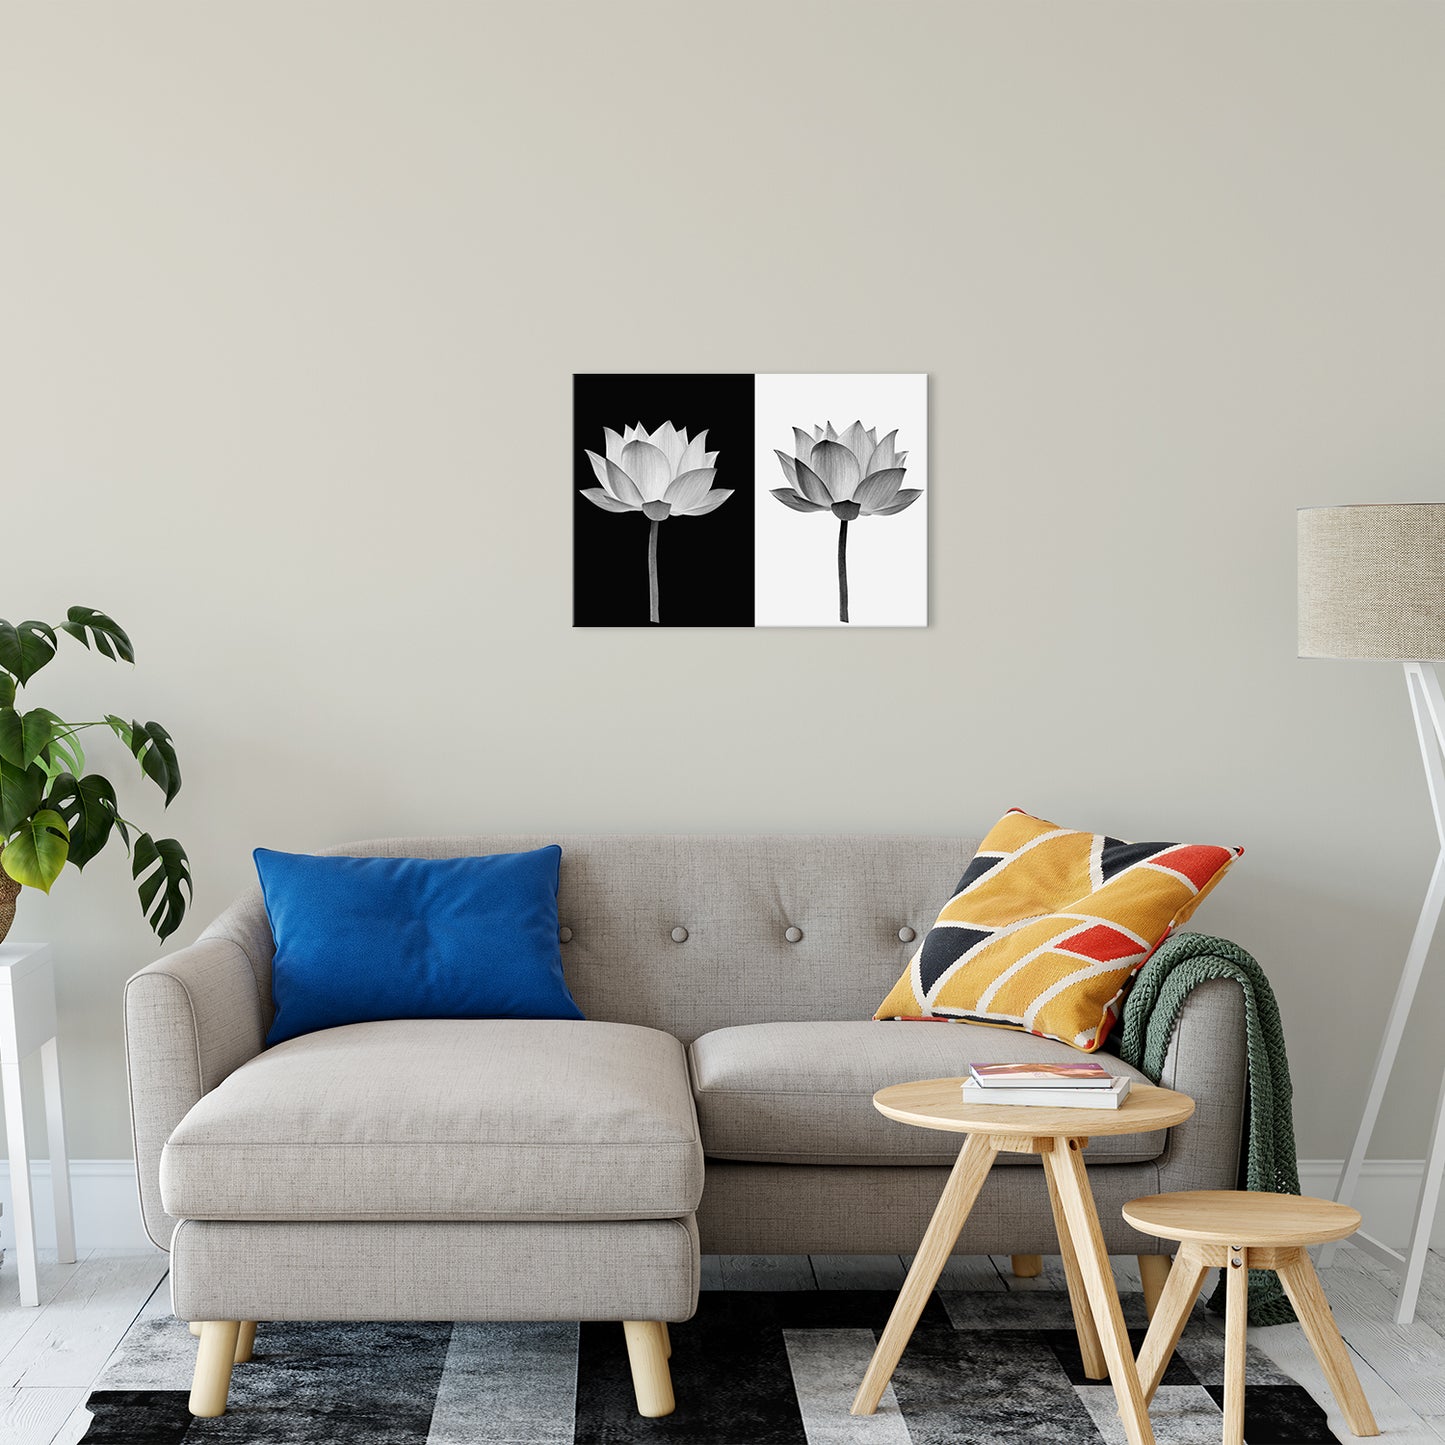 Lotus Flower on Black and White Background Floral Nature Photo Fine Art Canvas Print 20" x 24" - PIPAFINEART